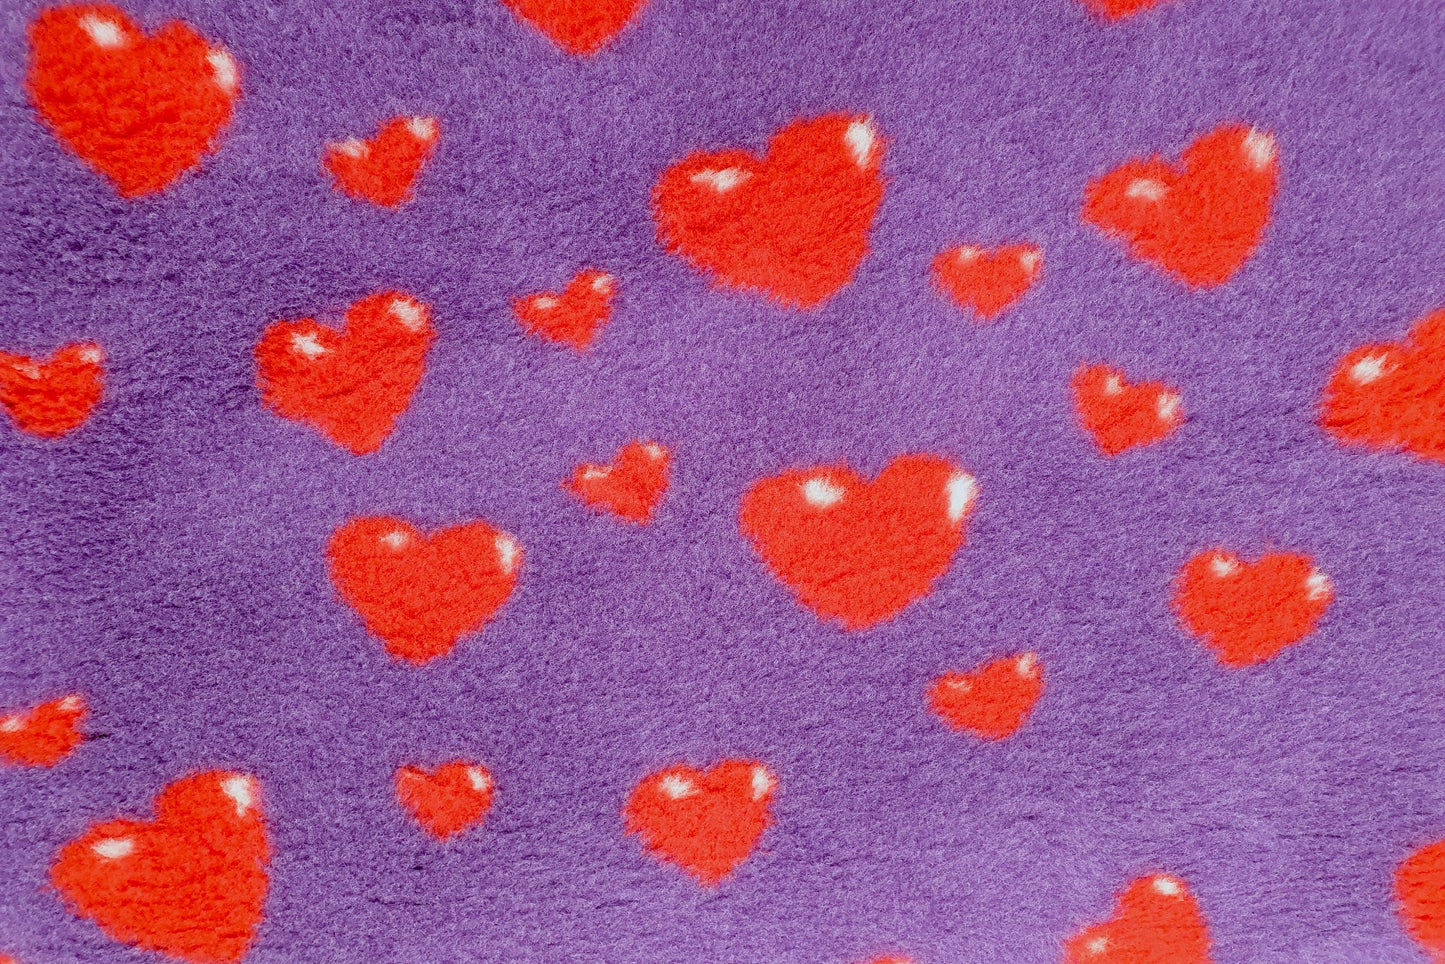 Vet Bed - Rubber Backed - Purple with Red 3D Hearts